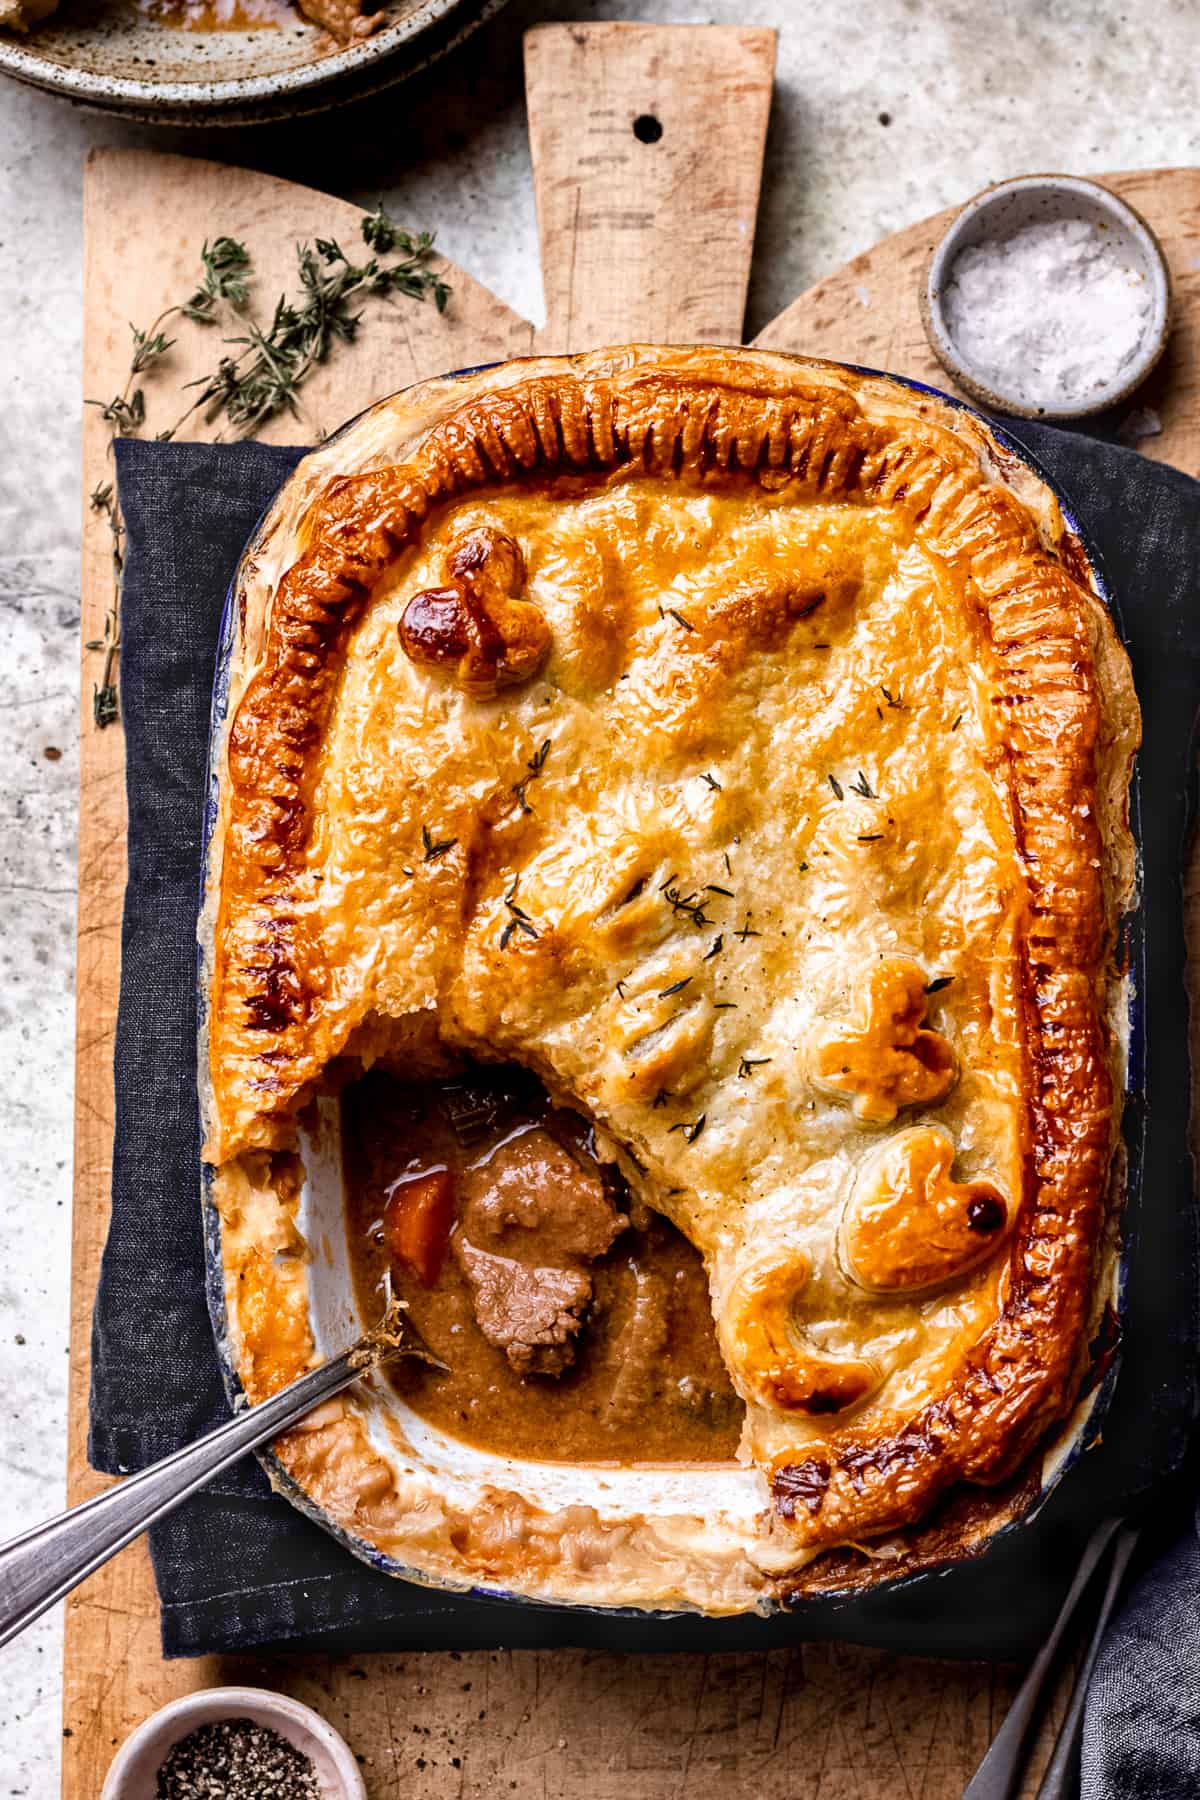 Classic Meat Pie recipe with step-by-step photos